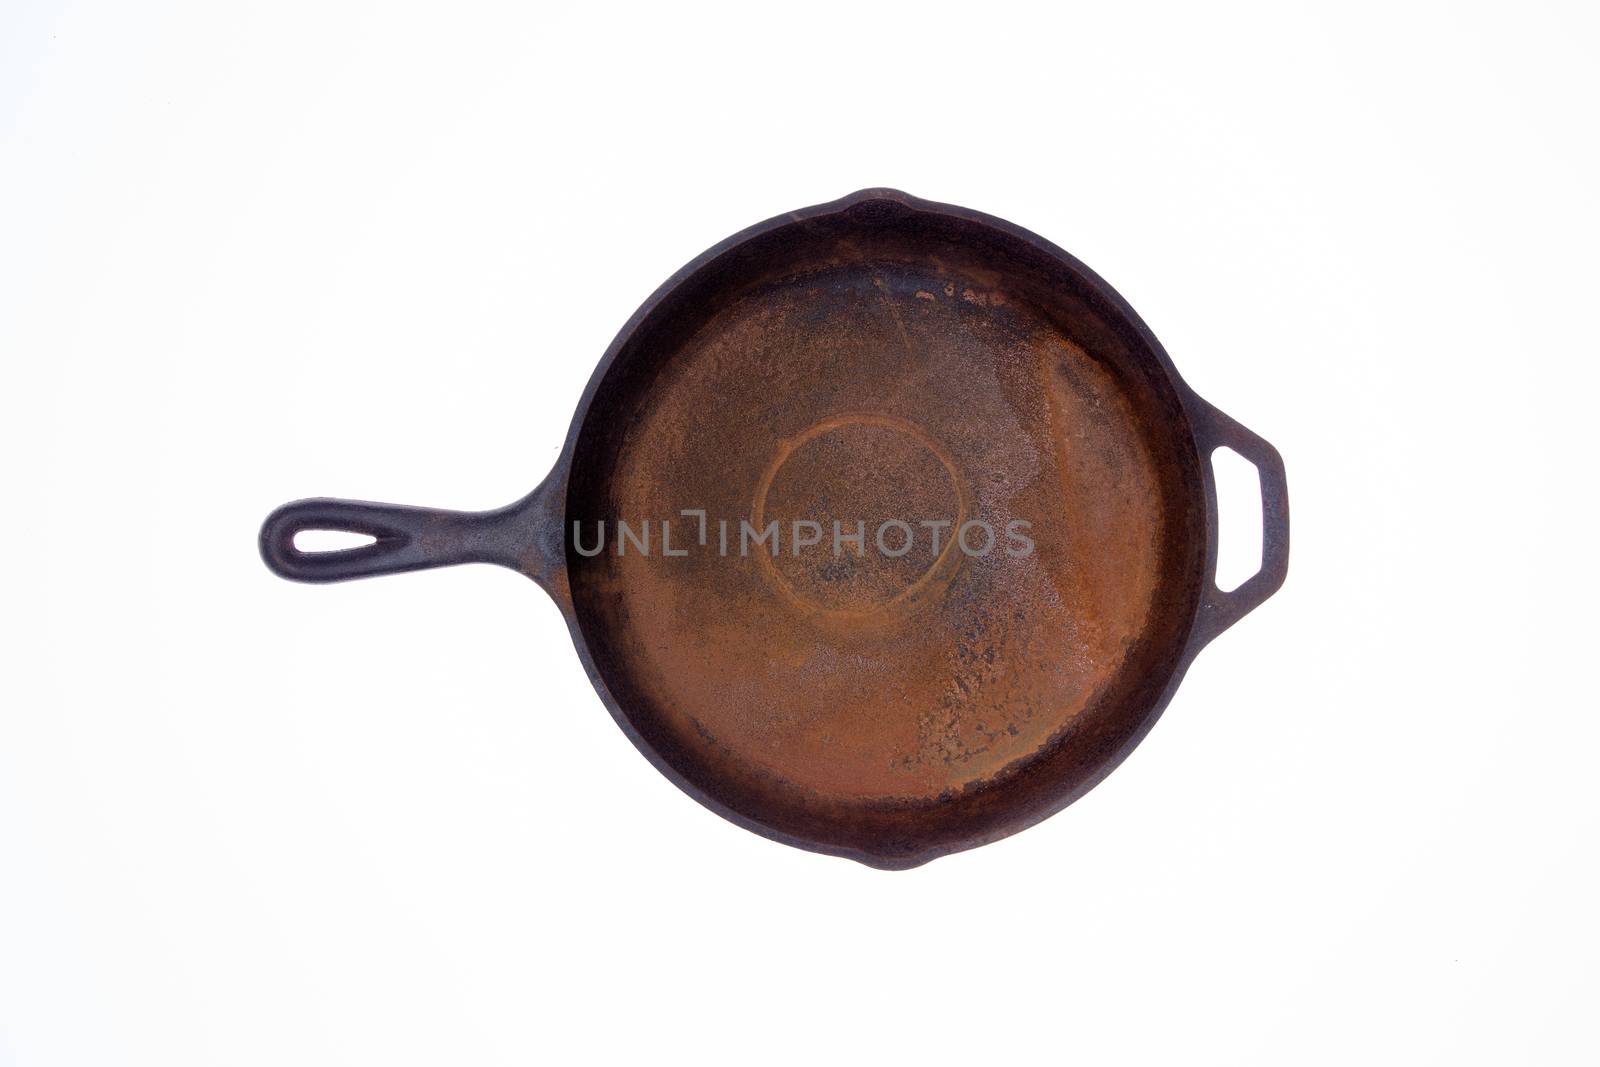 Old rusty round black cast iron frying pan viewed from above isolated on a white background centered in the frame